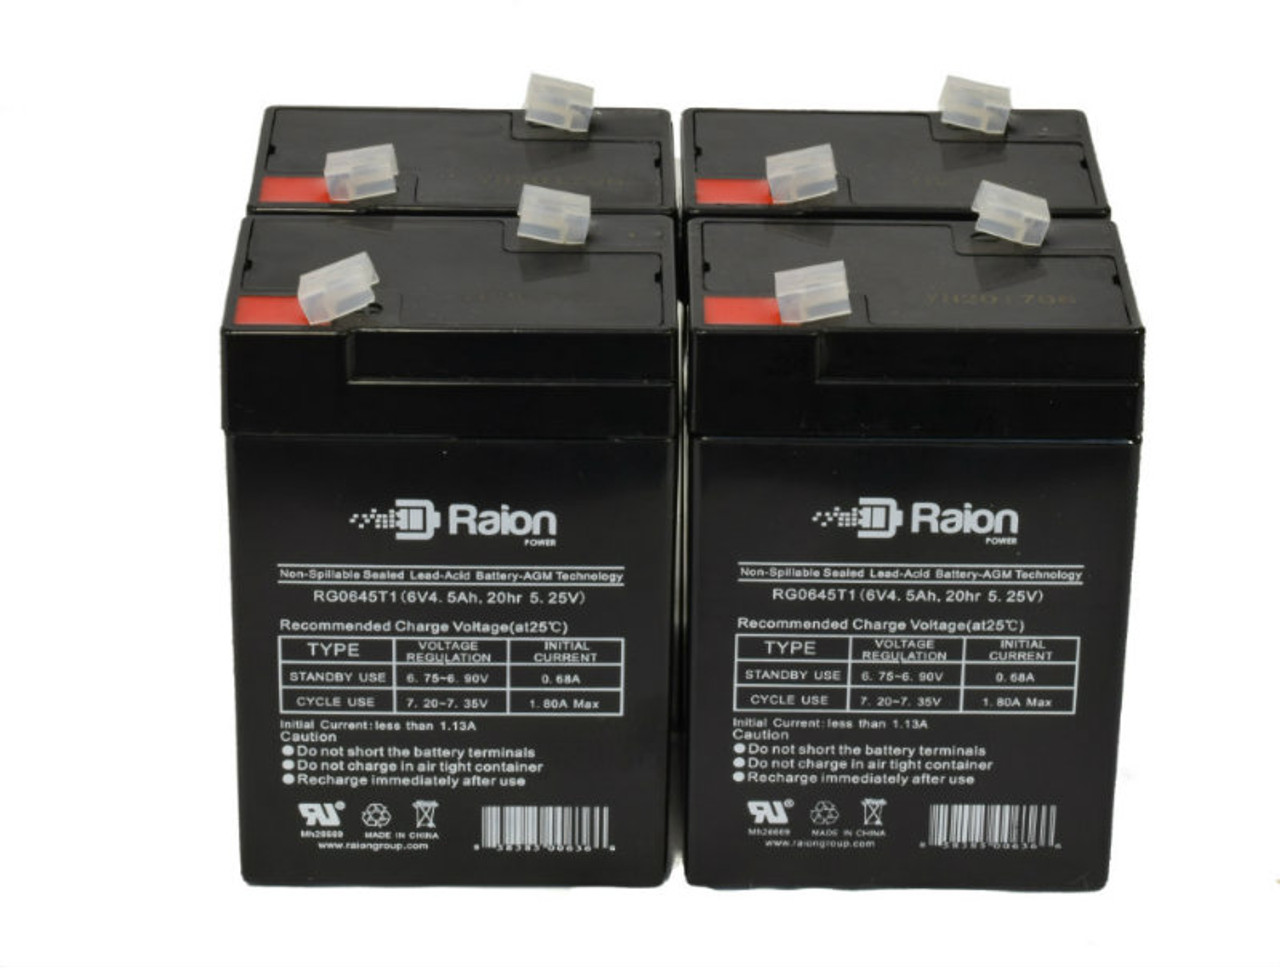 Raion Power 6V 4.5Ah Replacement Emergency Light Battery for Light Alarms RXE8 - 4 Pack